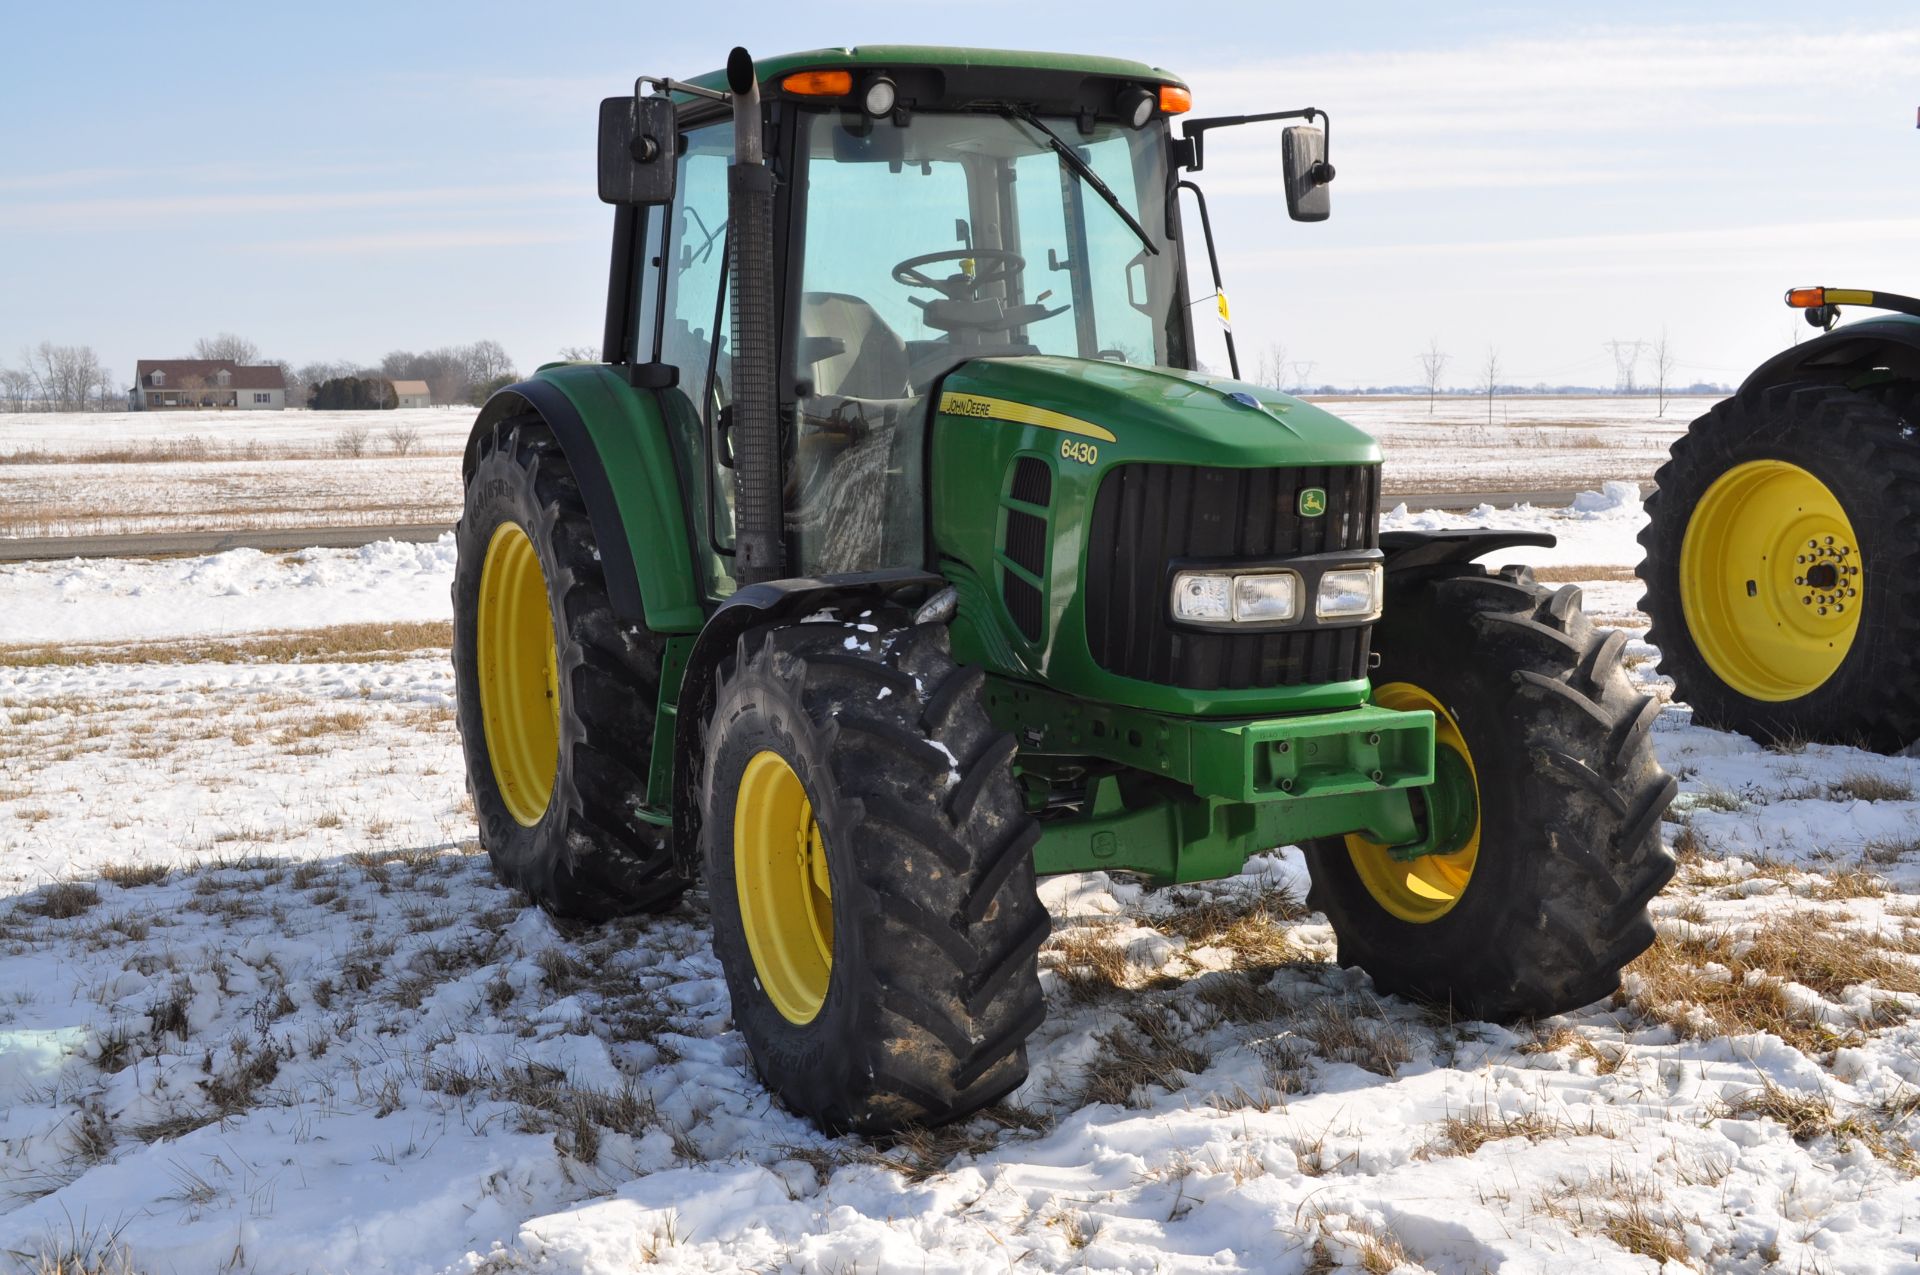 John Deere 6430 tractor, MFWD, C/H/A, 6x4 trans, 460/85R38 rear, 420/85R24 front, front fenders, - Image 6 of 36